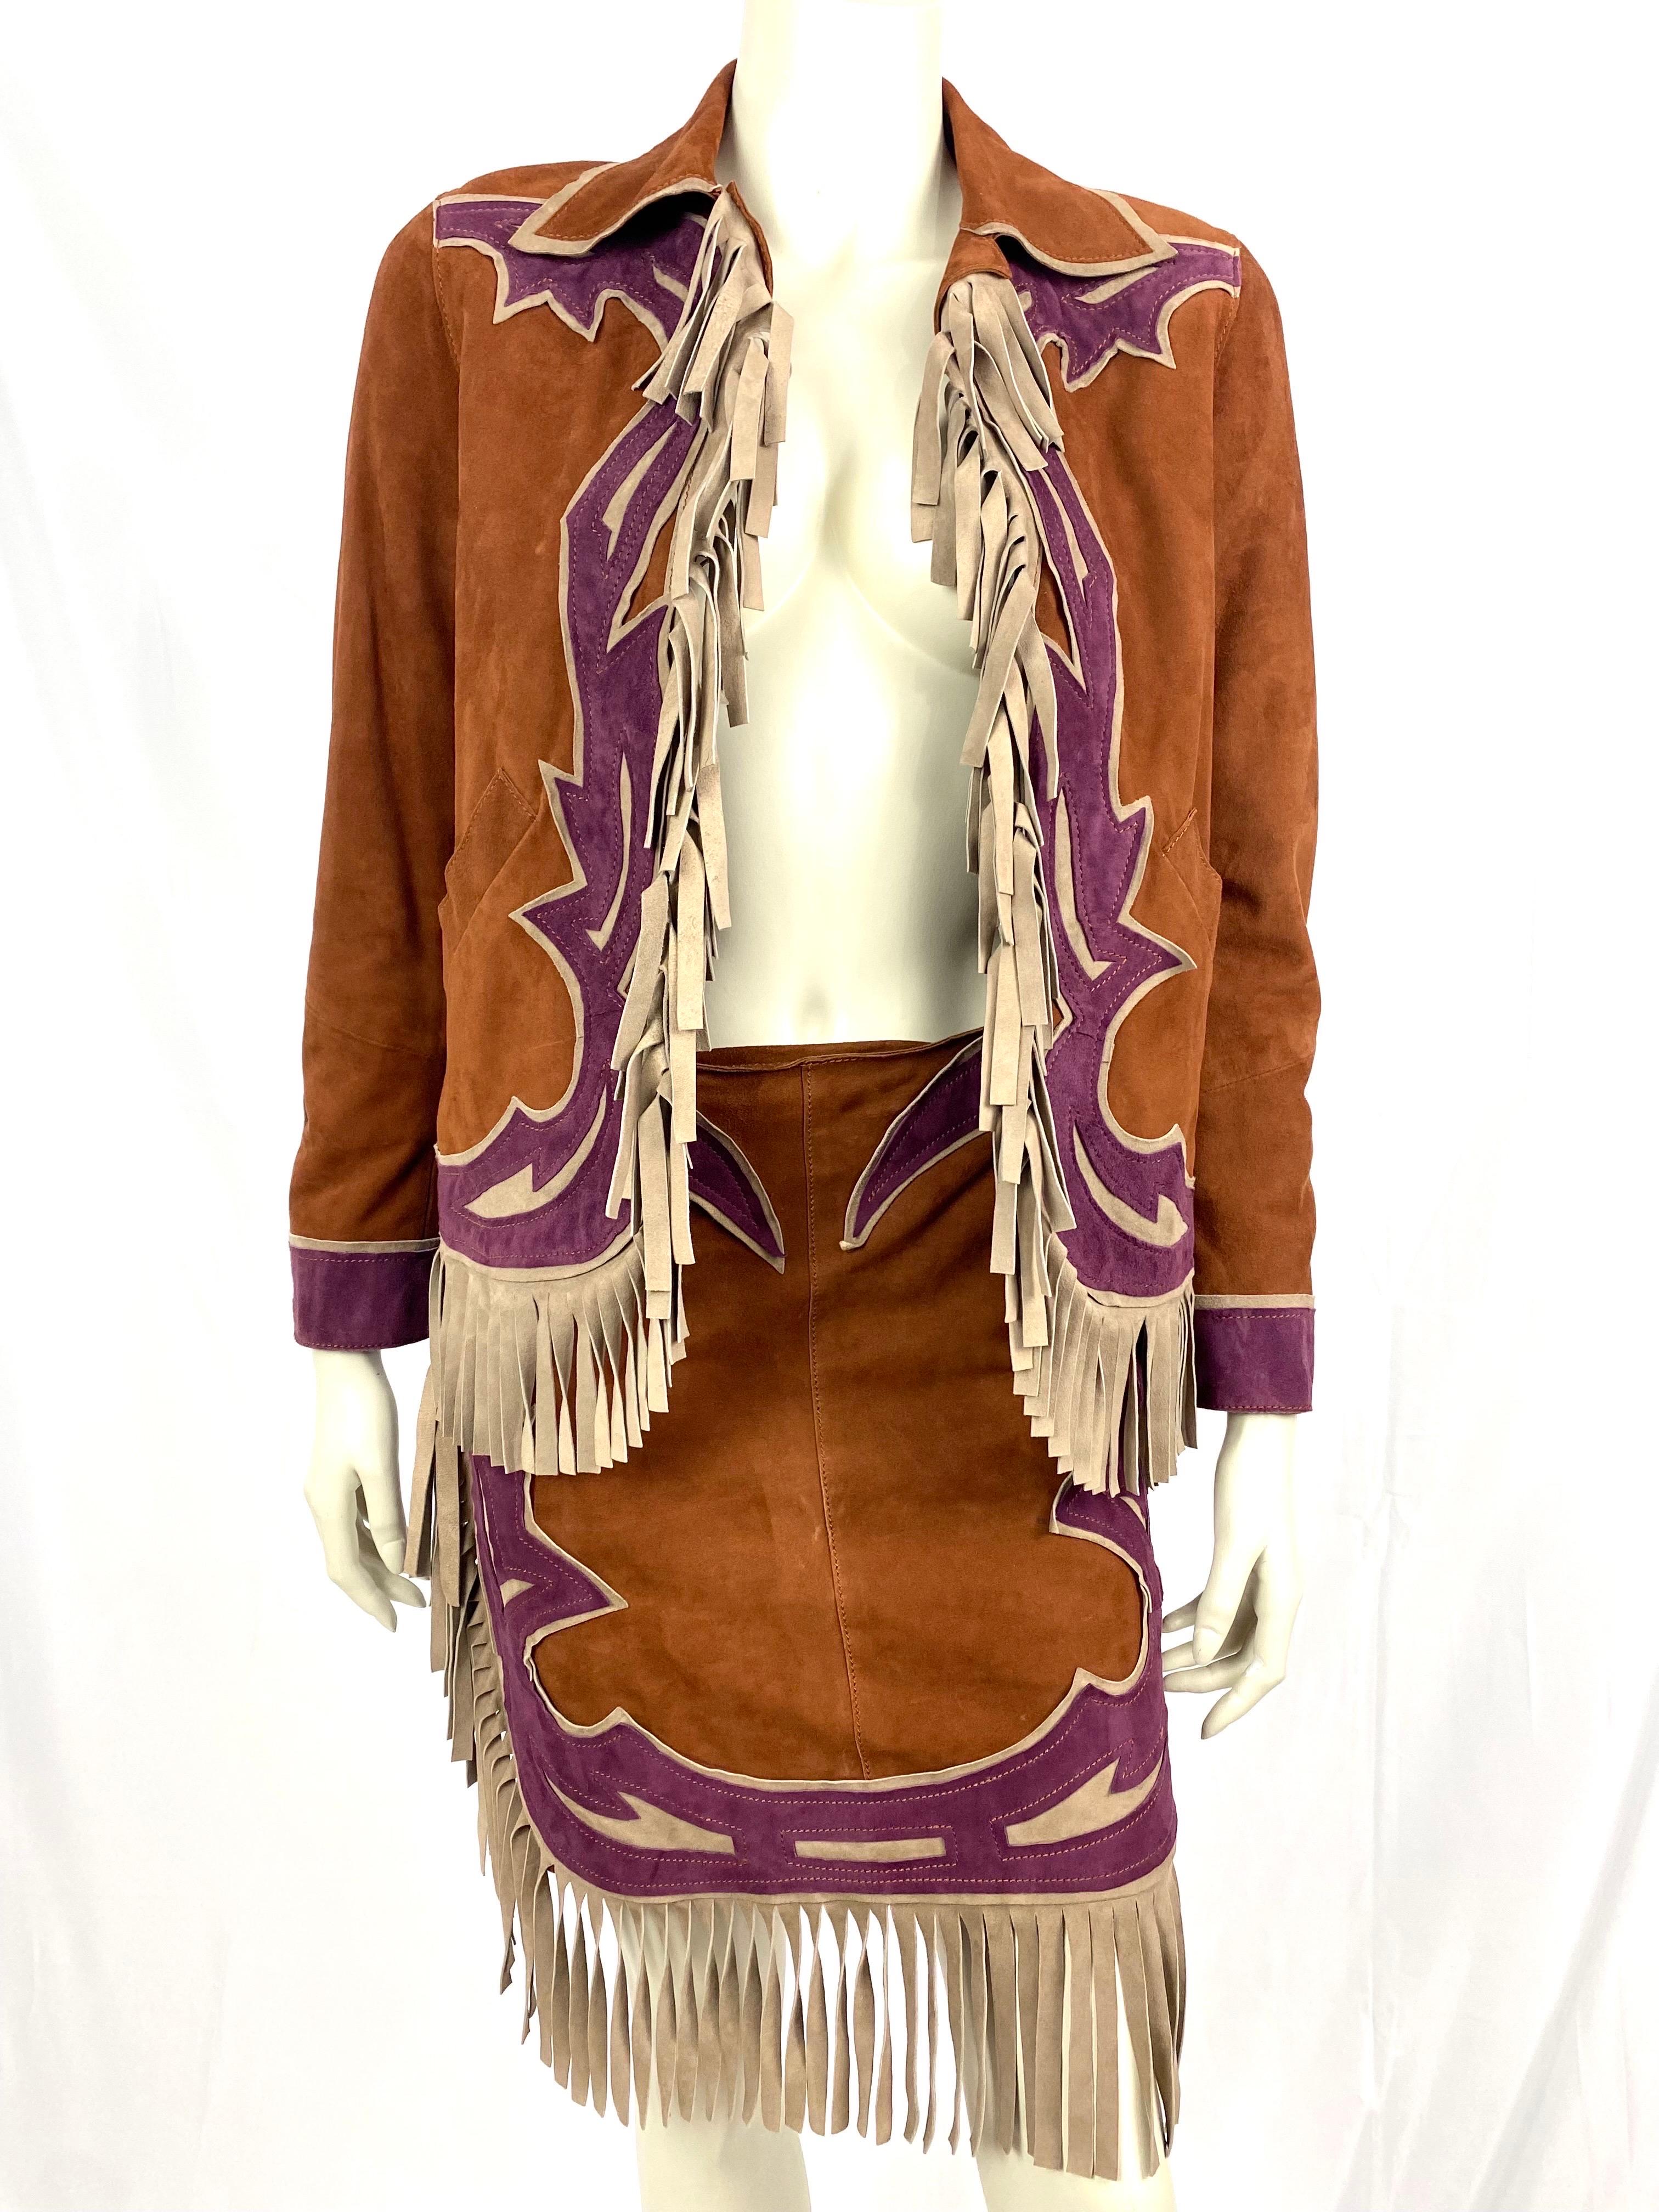 Vintage Philosophy by Alberta Ferretti fringed suede set For Sale 8